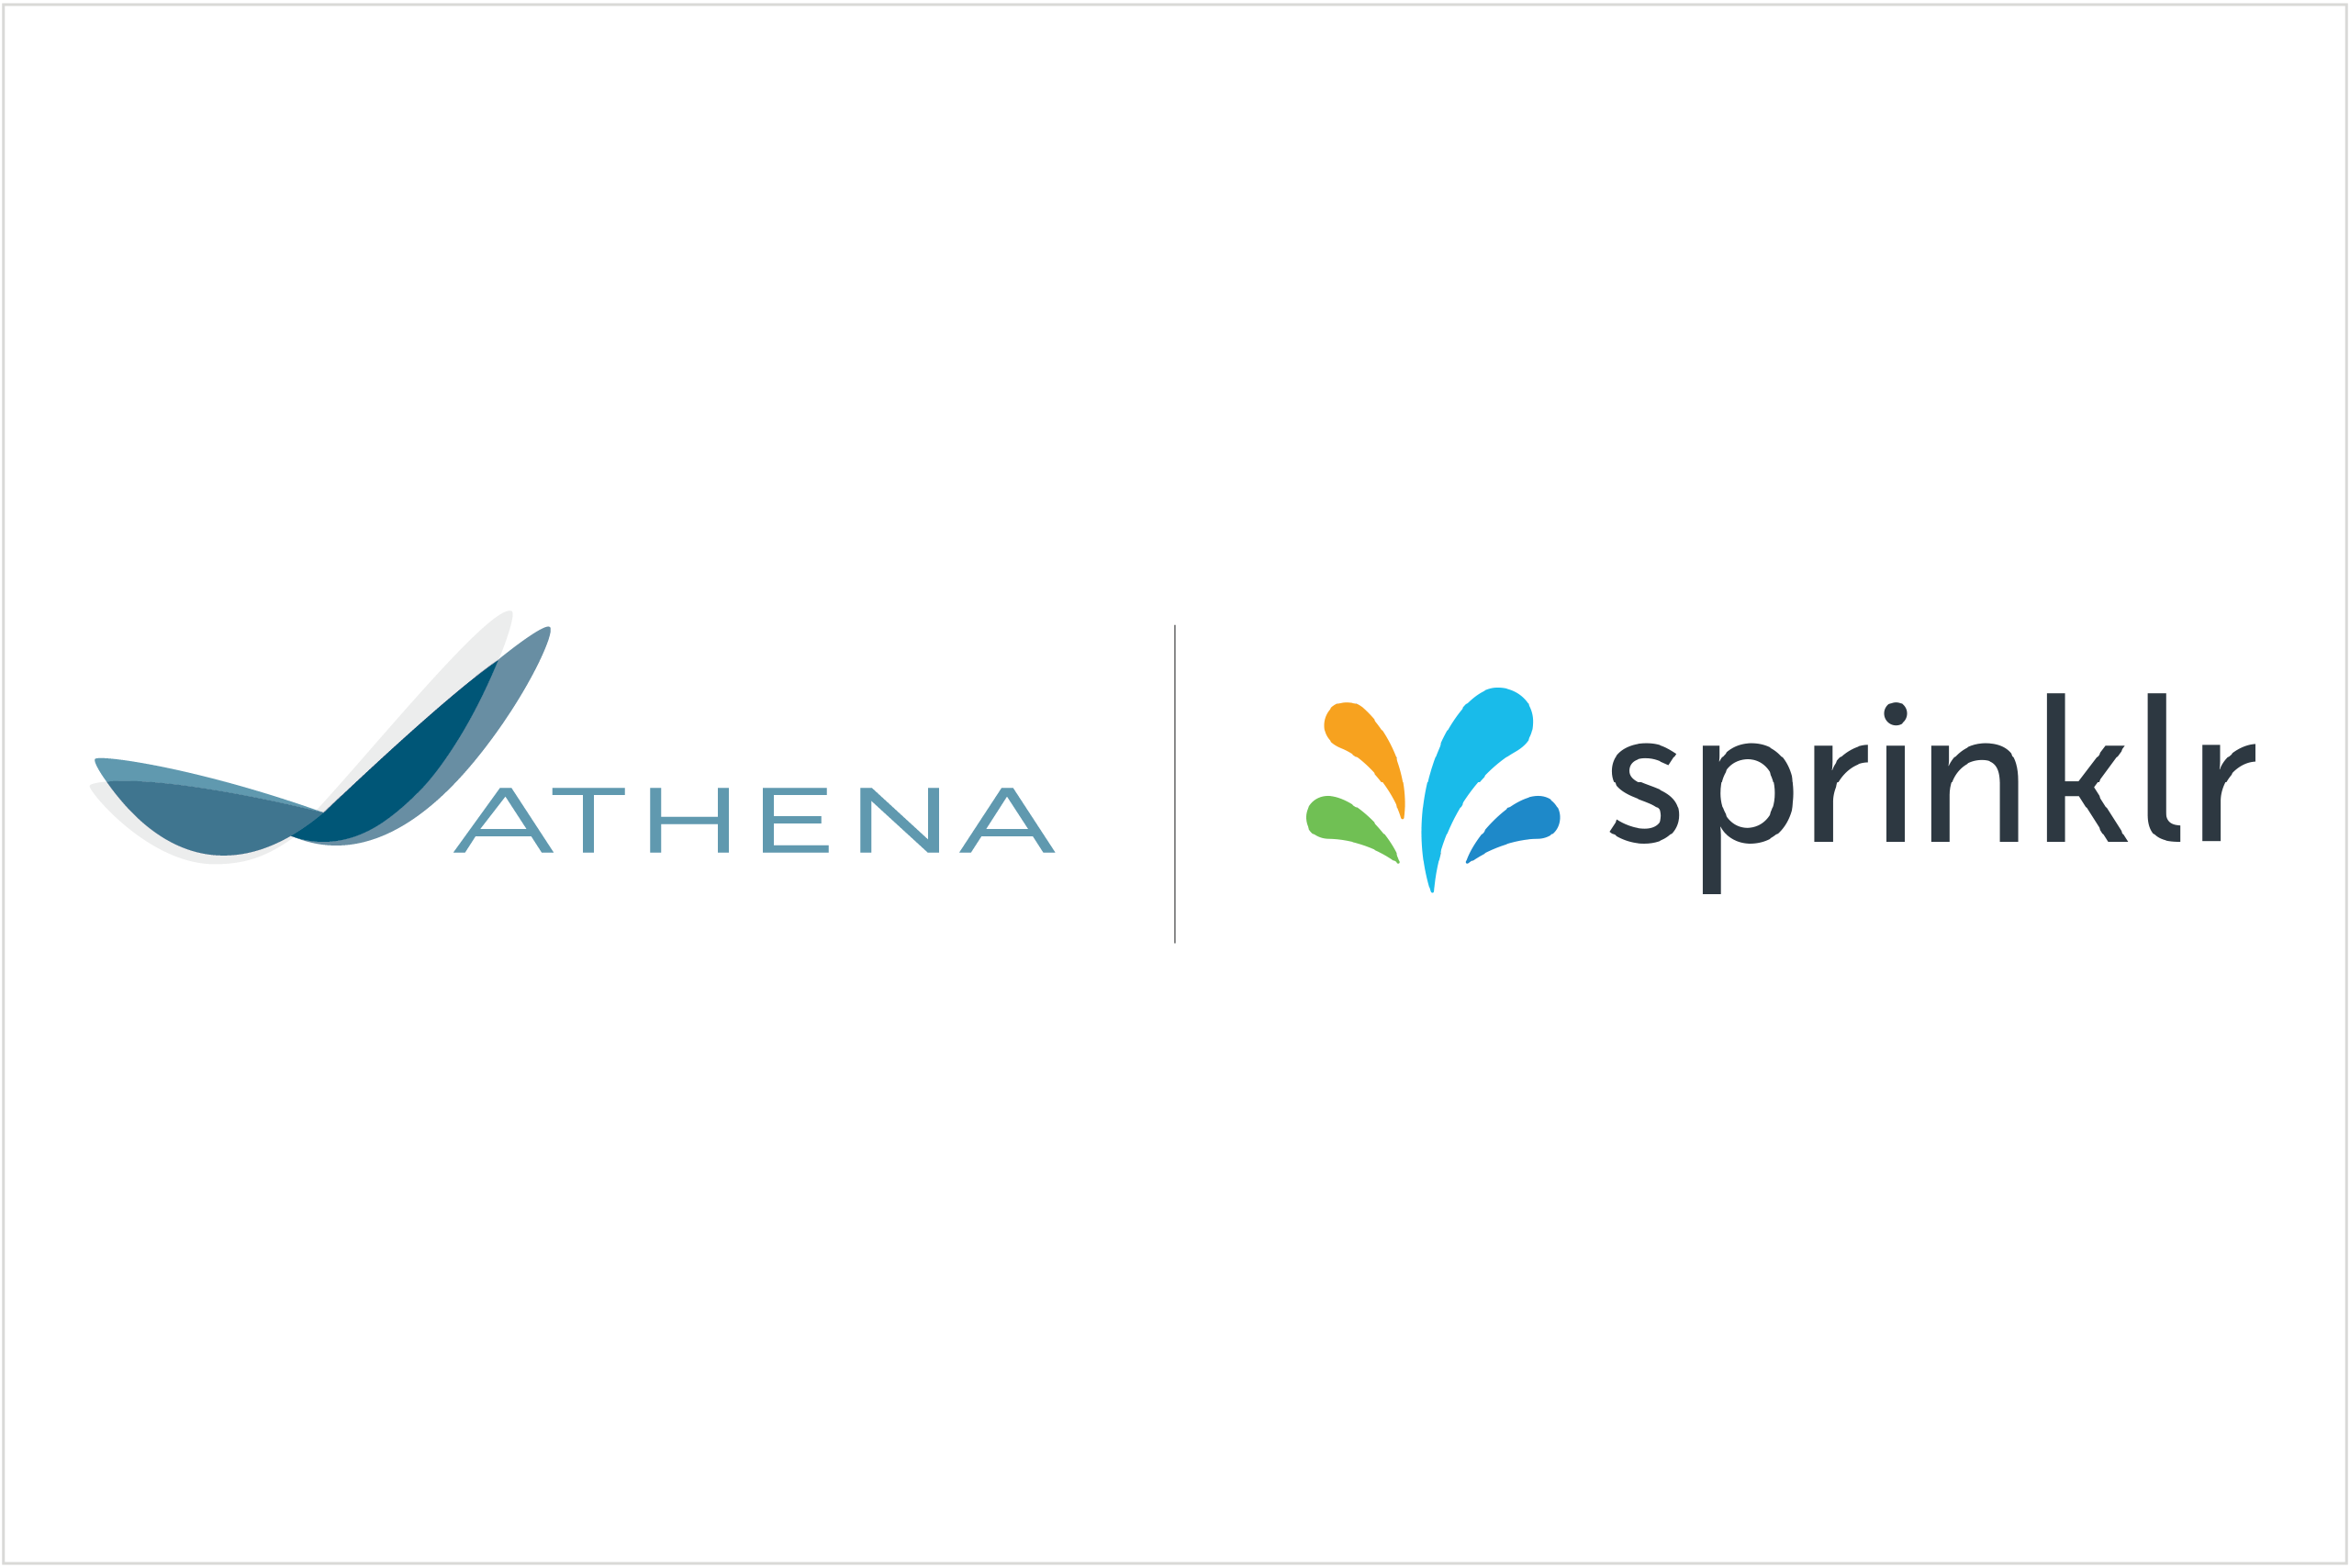 Athena Global Advisors and Sprinklr Partner to Help Enterprises Scale Data and Insights